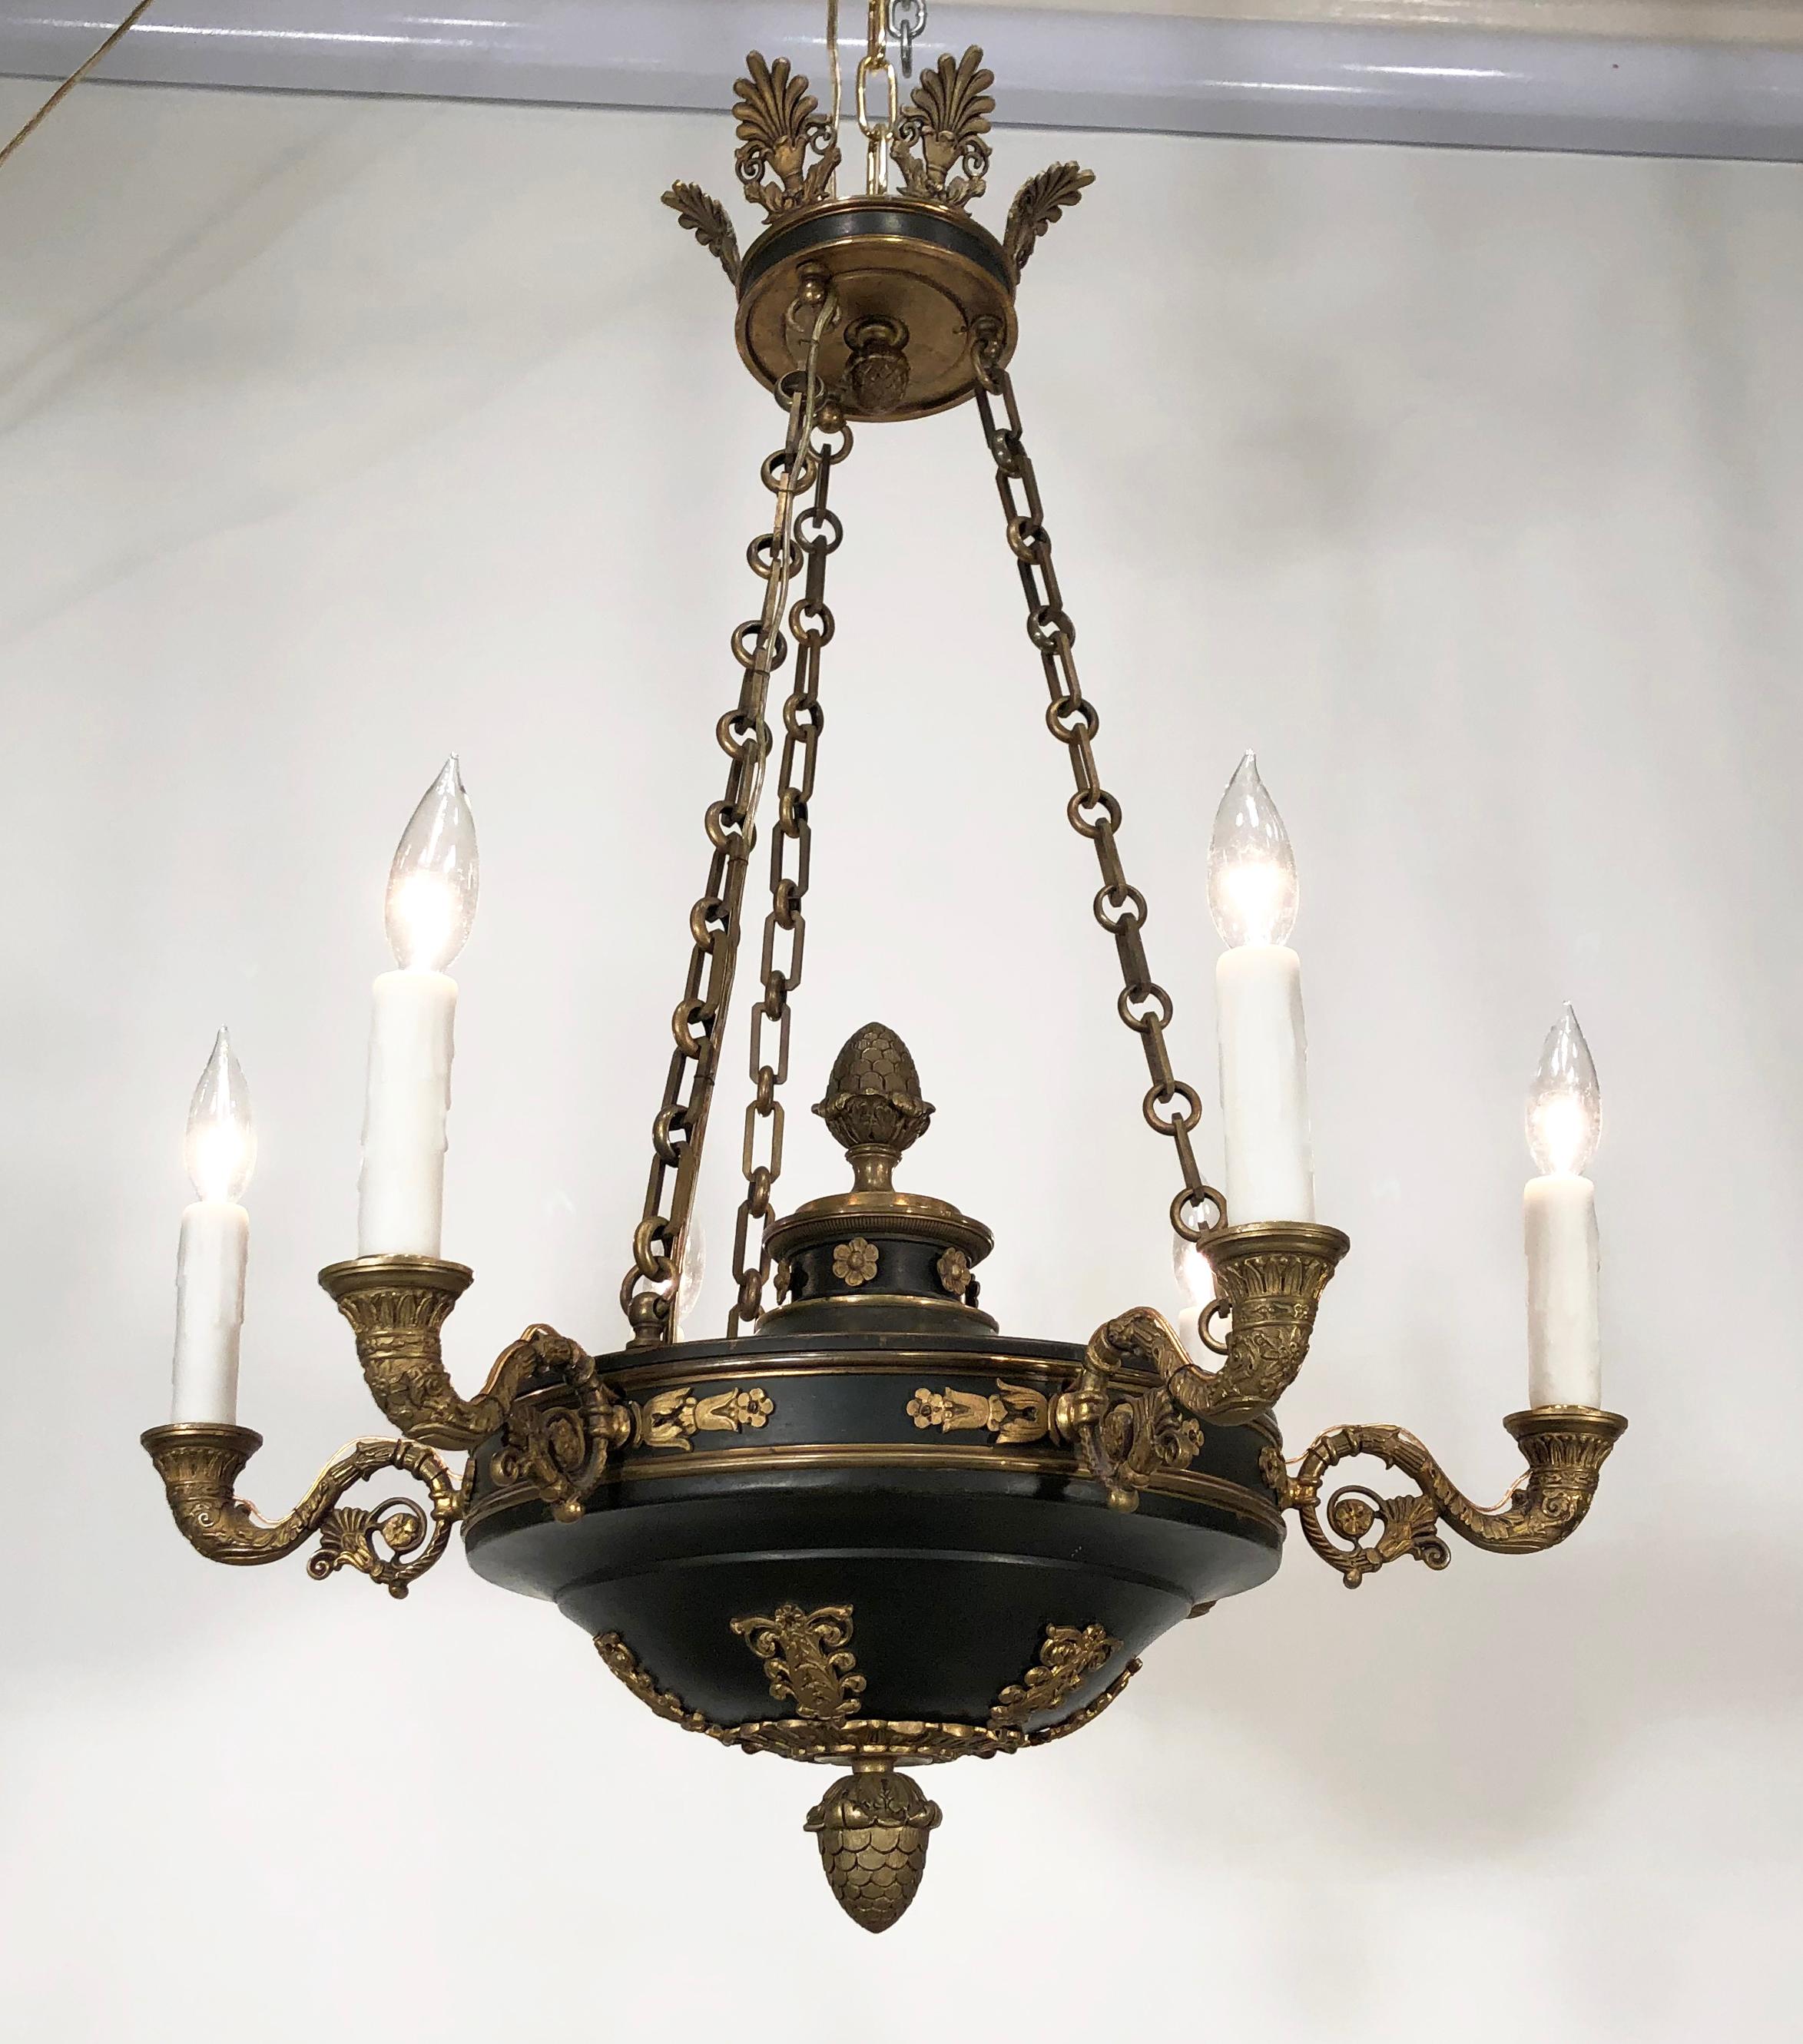 This beautiful 1820s-1830s English Regency bronze chandelier has an Egyptian motif. This amazing chandelier has six bronze arms mounted to a patinated bowl that is suspended by 3 bronze chains from a Regency Crown with Anthemion’s. Decorative pine